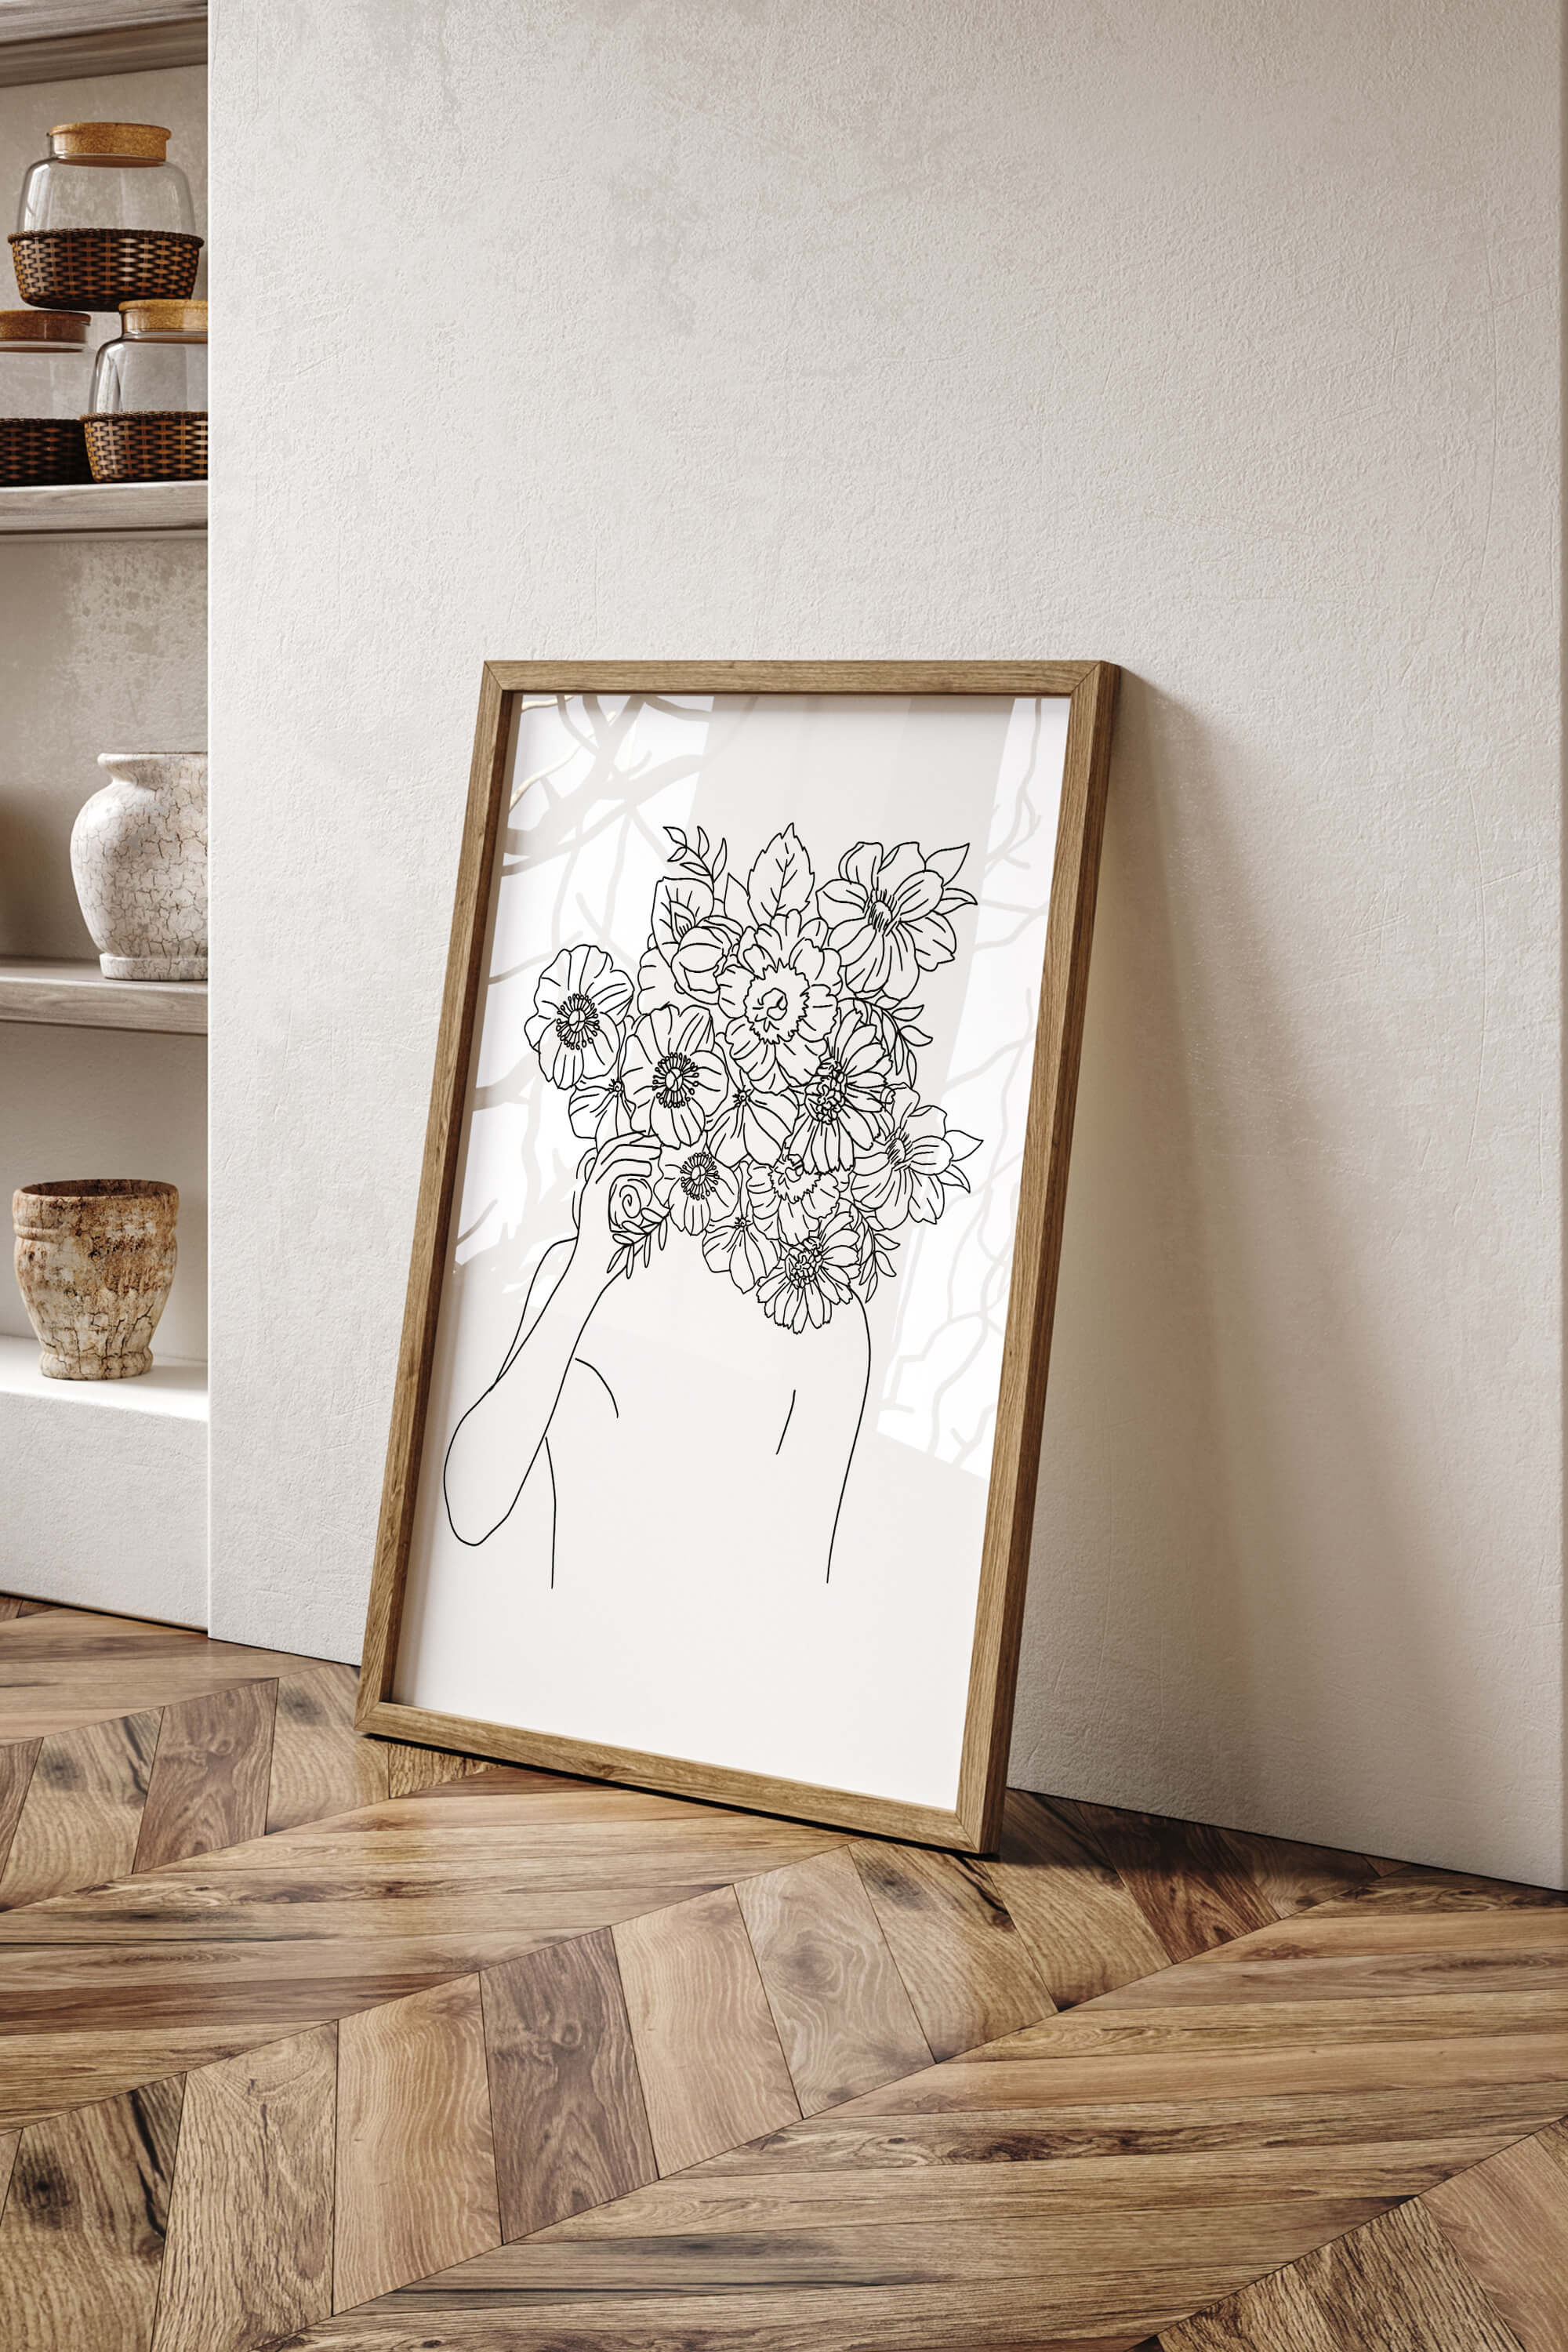 A captivating monochrome line art print, highlighting the beauty of a woman with a flower head – an exquisite piece that adds a touch of nature and elegance to your wall decor.